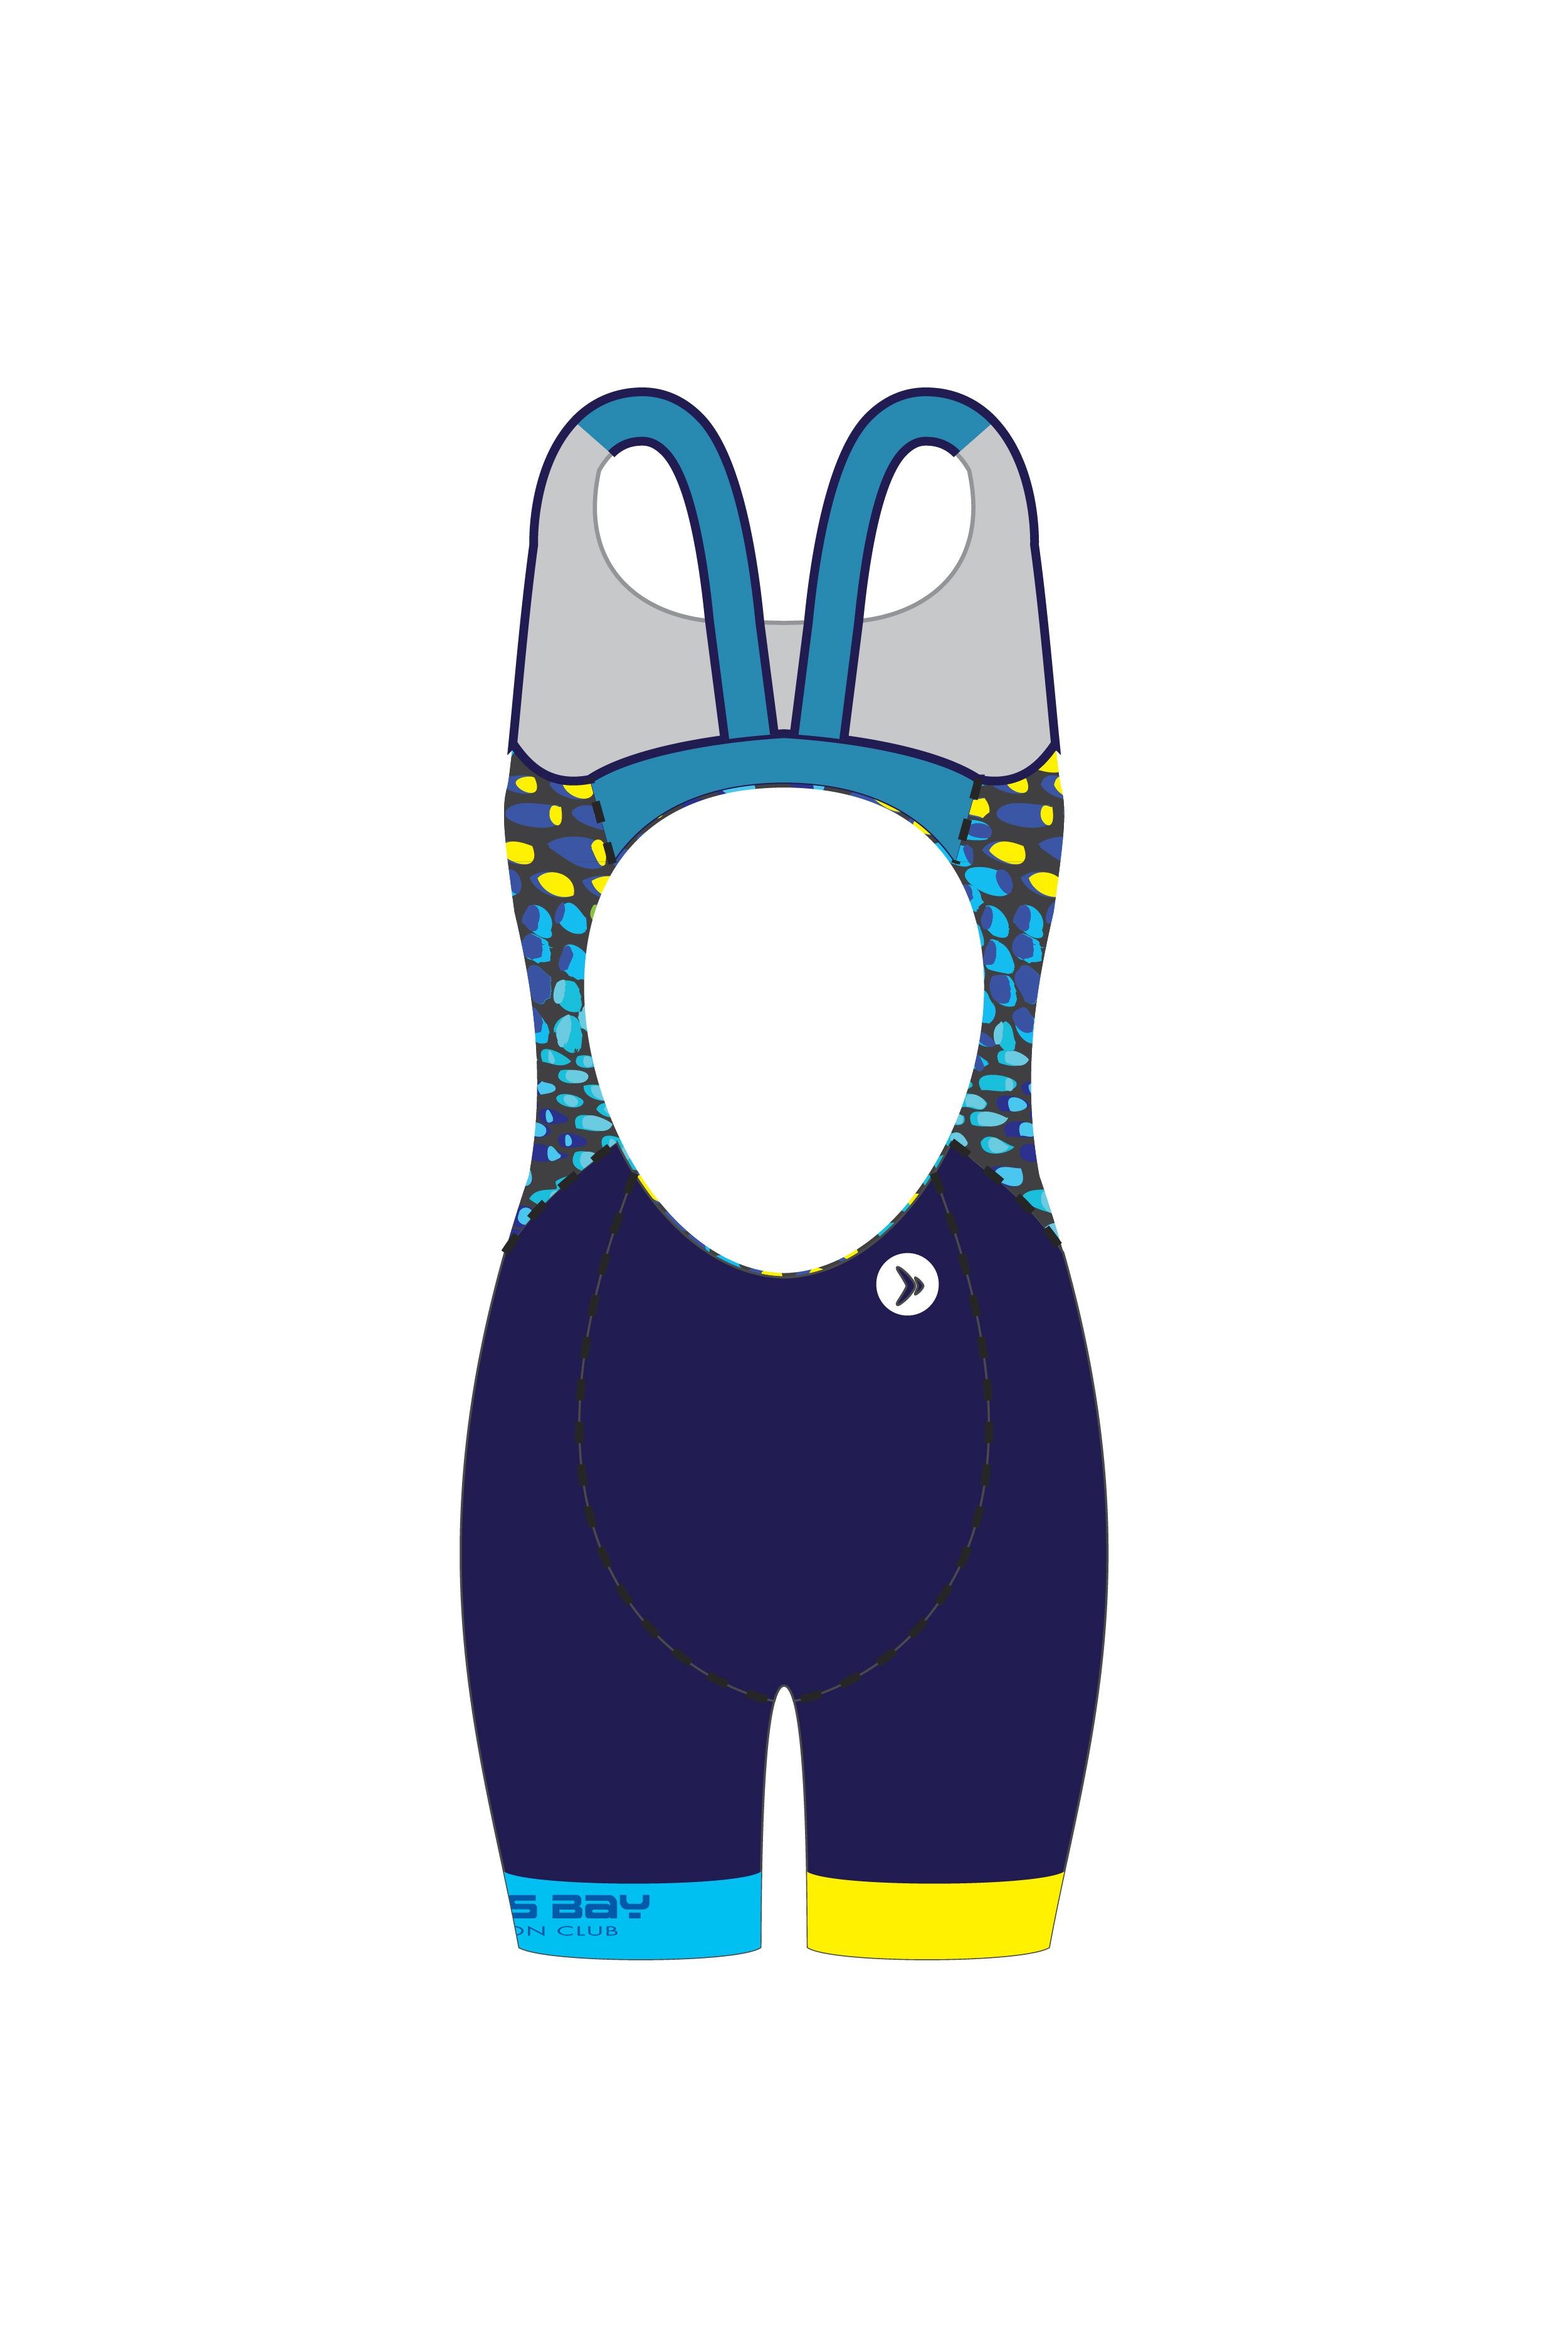 Jervis Bay Tri Club Girl's Open Back Tri Suit